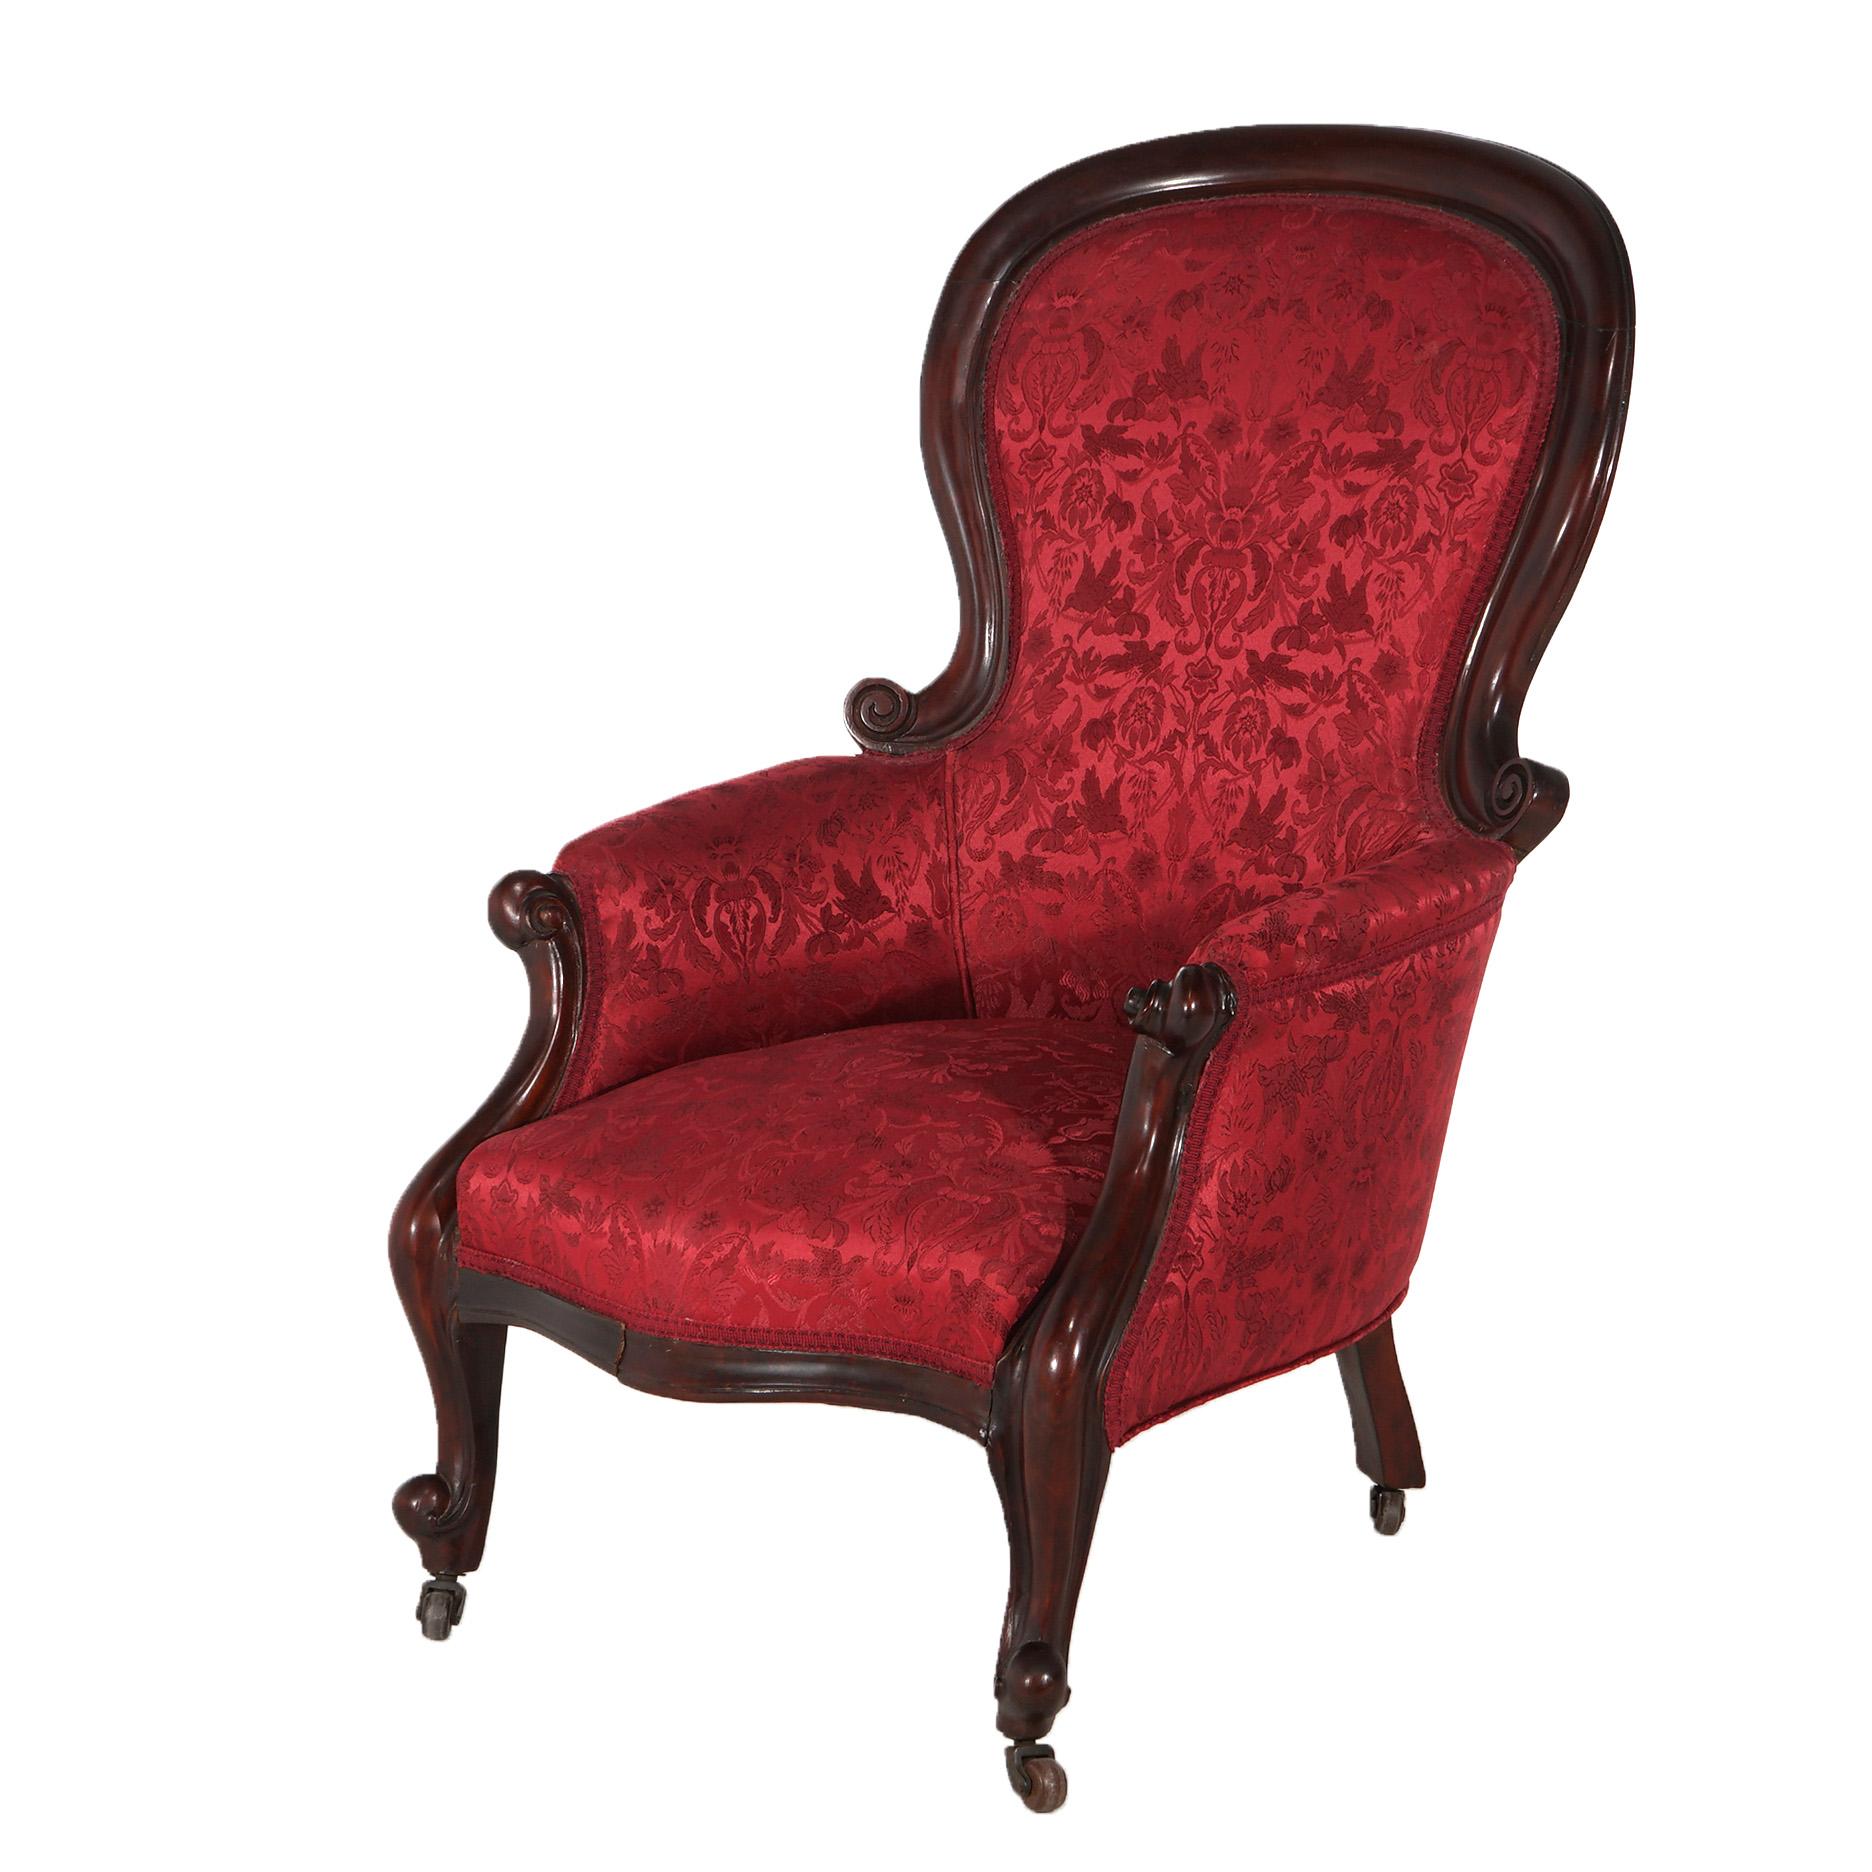 ***Ask About Reduced In-House Delivery Rates - Reliable Professional Service & Fully Insured***

Antique French Victorian Louis XV Style Upholstered Parlor Chair C1890

Measures - 41.5